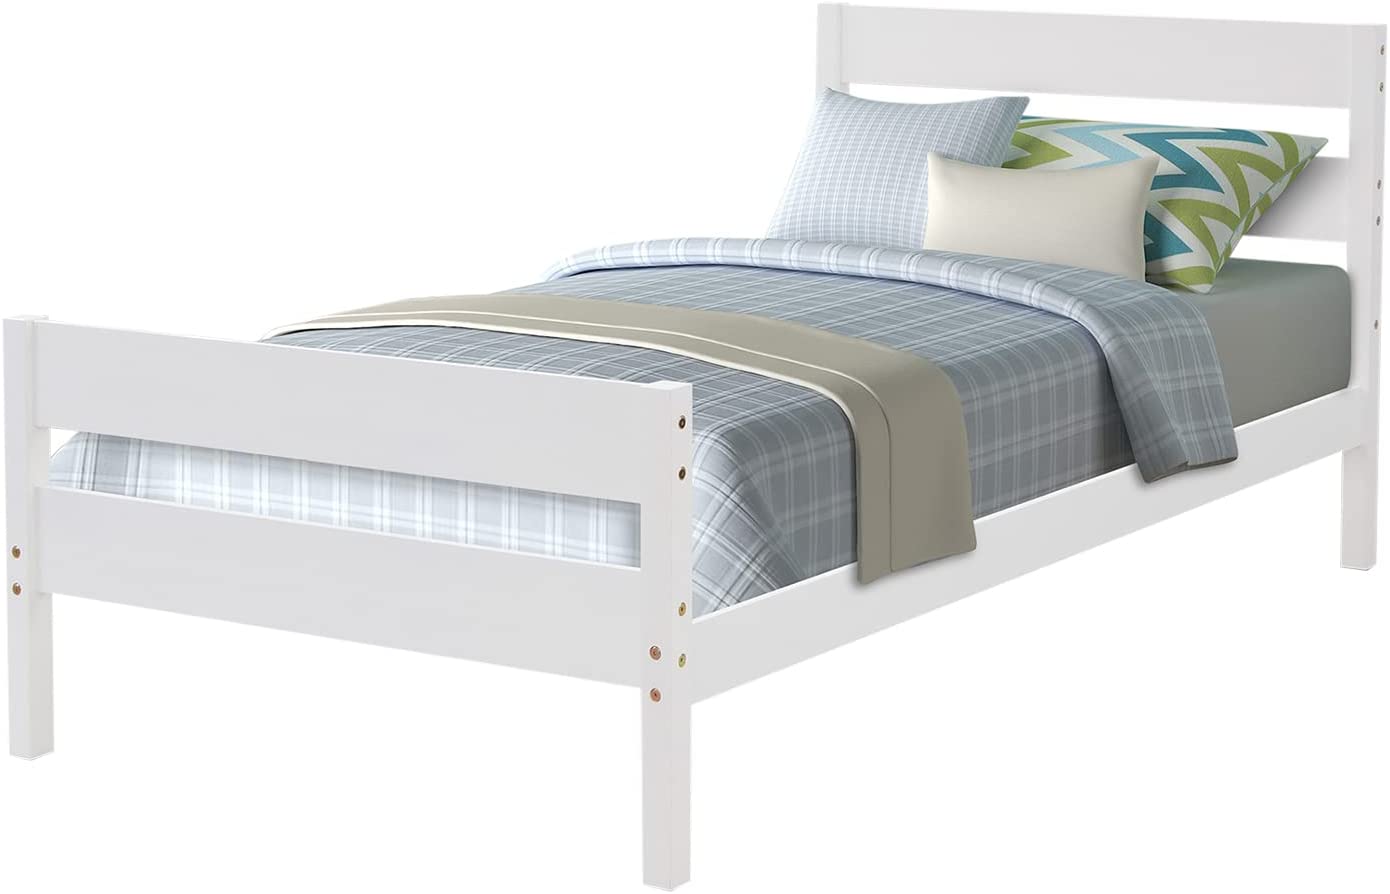 Maycasa Twin Bed, Wood Twin Bed Frame with Headboard and Footboard